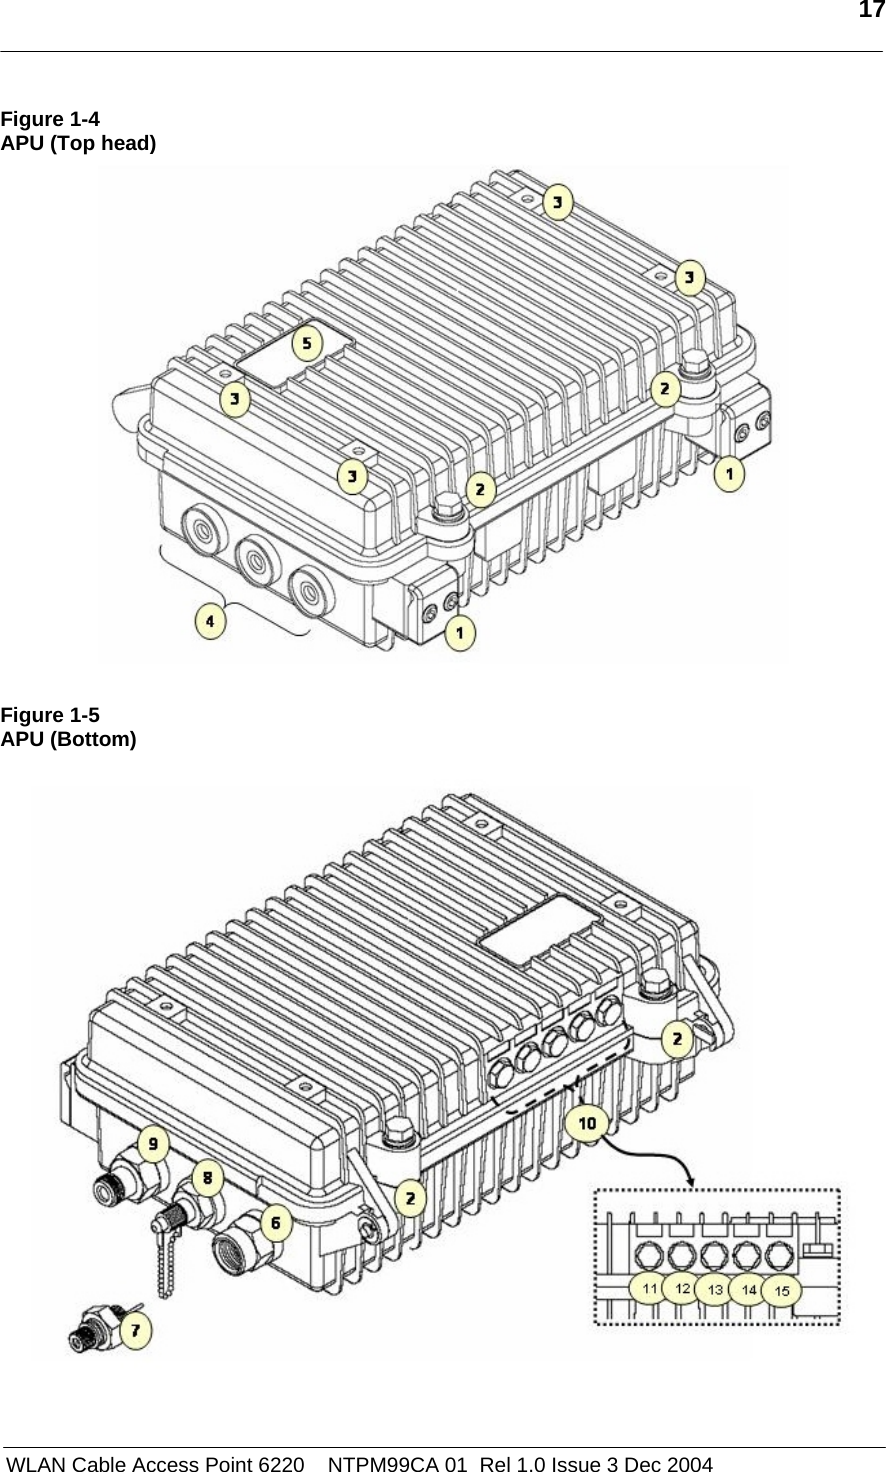   17   WLAN Cable Access Point 6220    NTPM99CA 01  Rel 1.0 Issue 3 Dec 2004 Figure 1-4 APU (Top head)   Figure 1-5 APU (Bottom)     